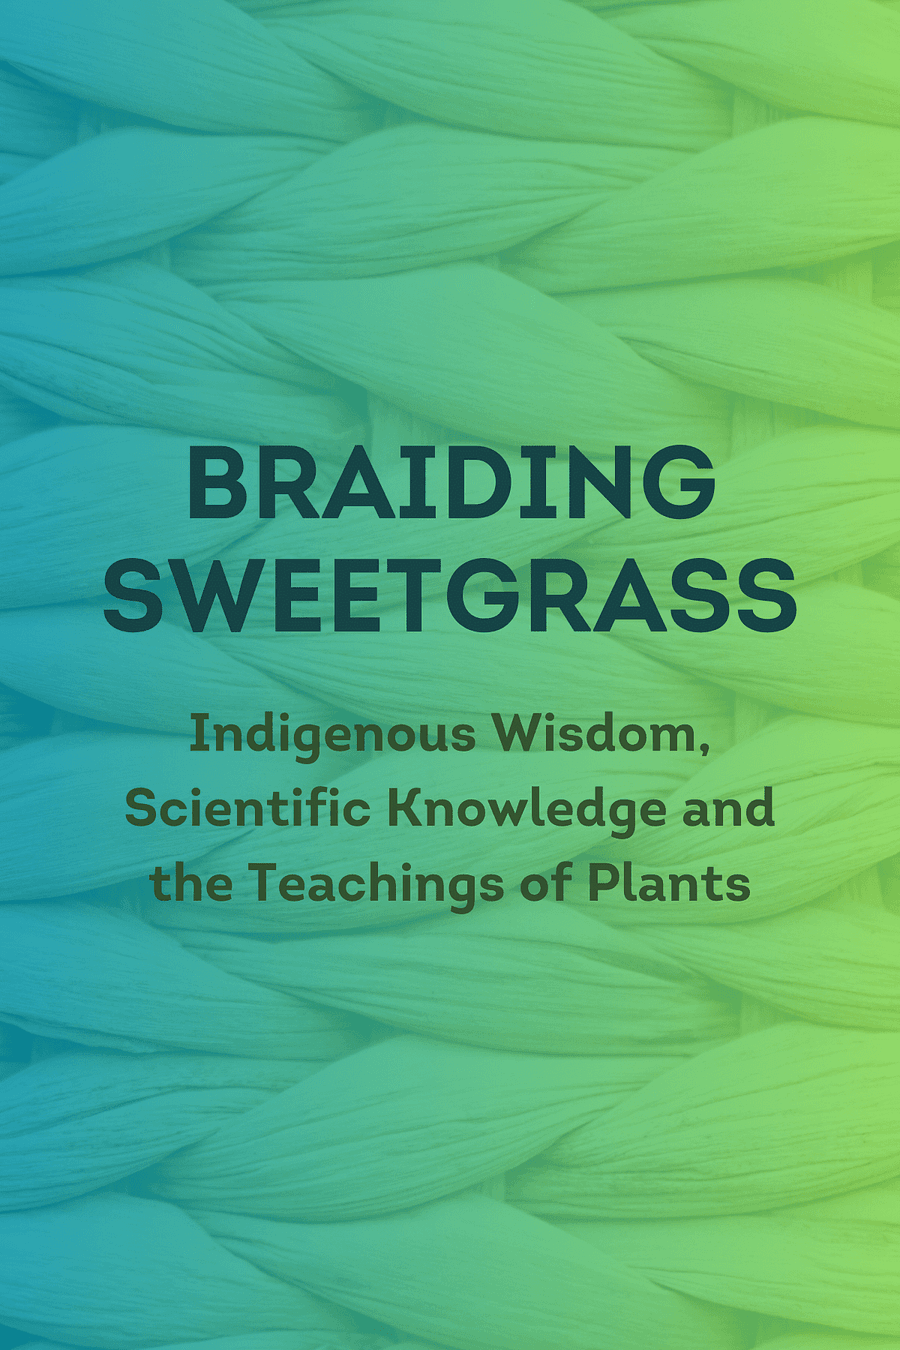 Braiding Sweetgrass by Robin Wall Kimmerer - Book Summary